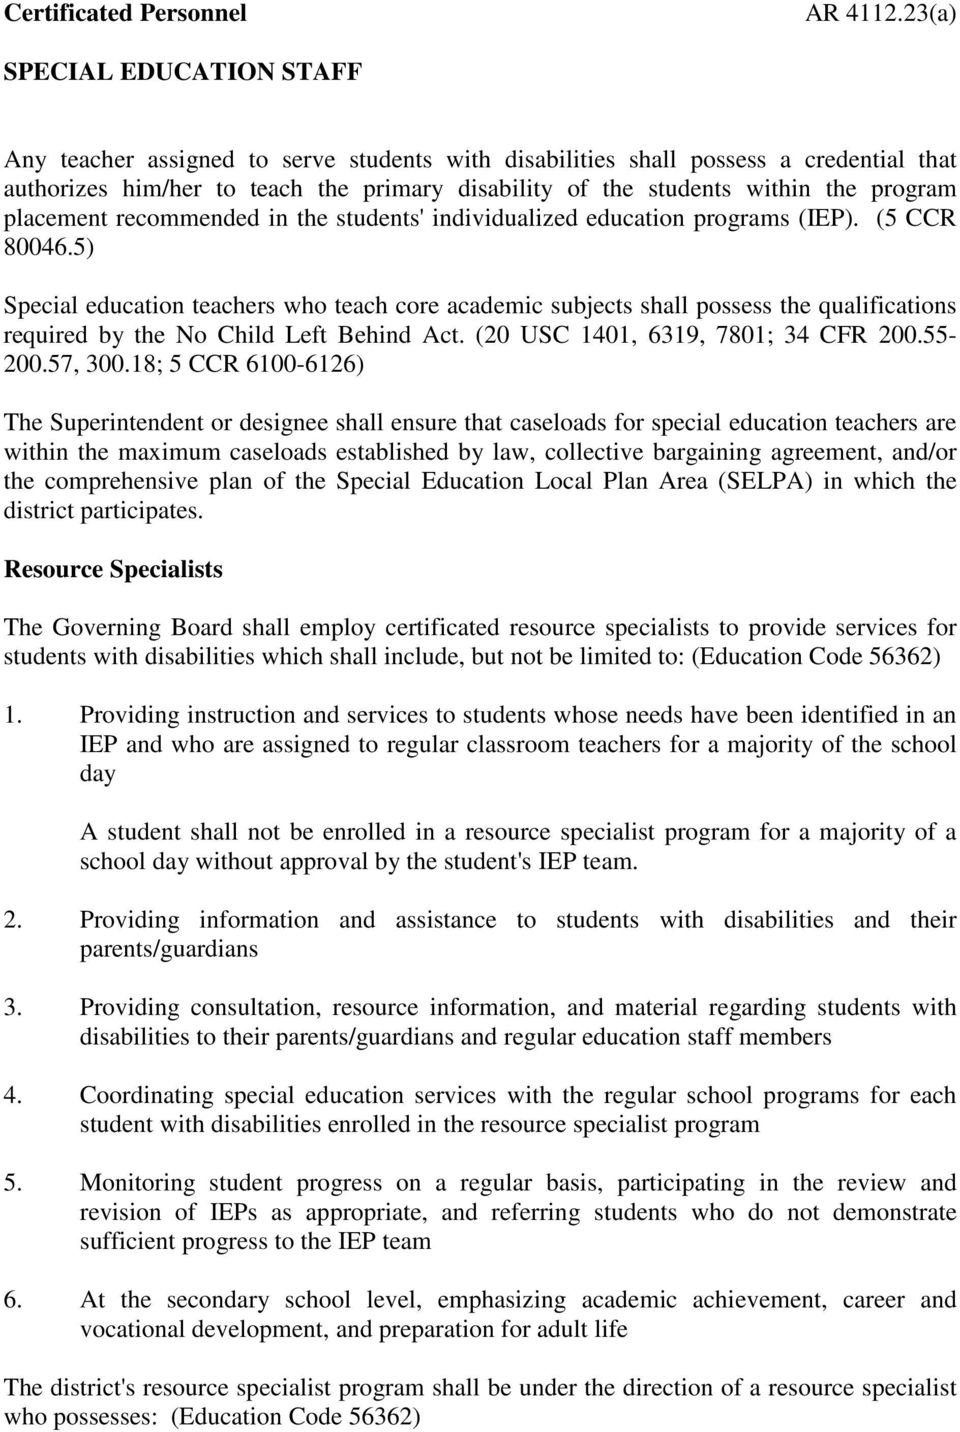 program placement recommended in the students' individualized education programs (IEP). (5 CCR 80046.